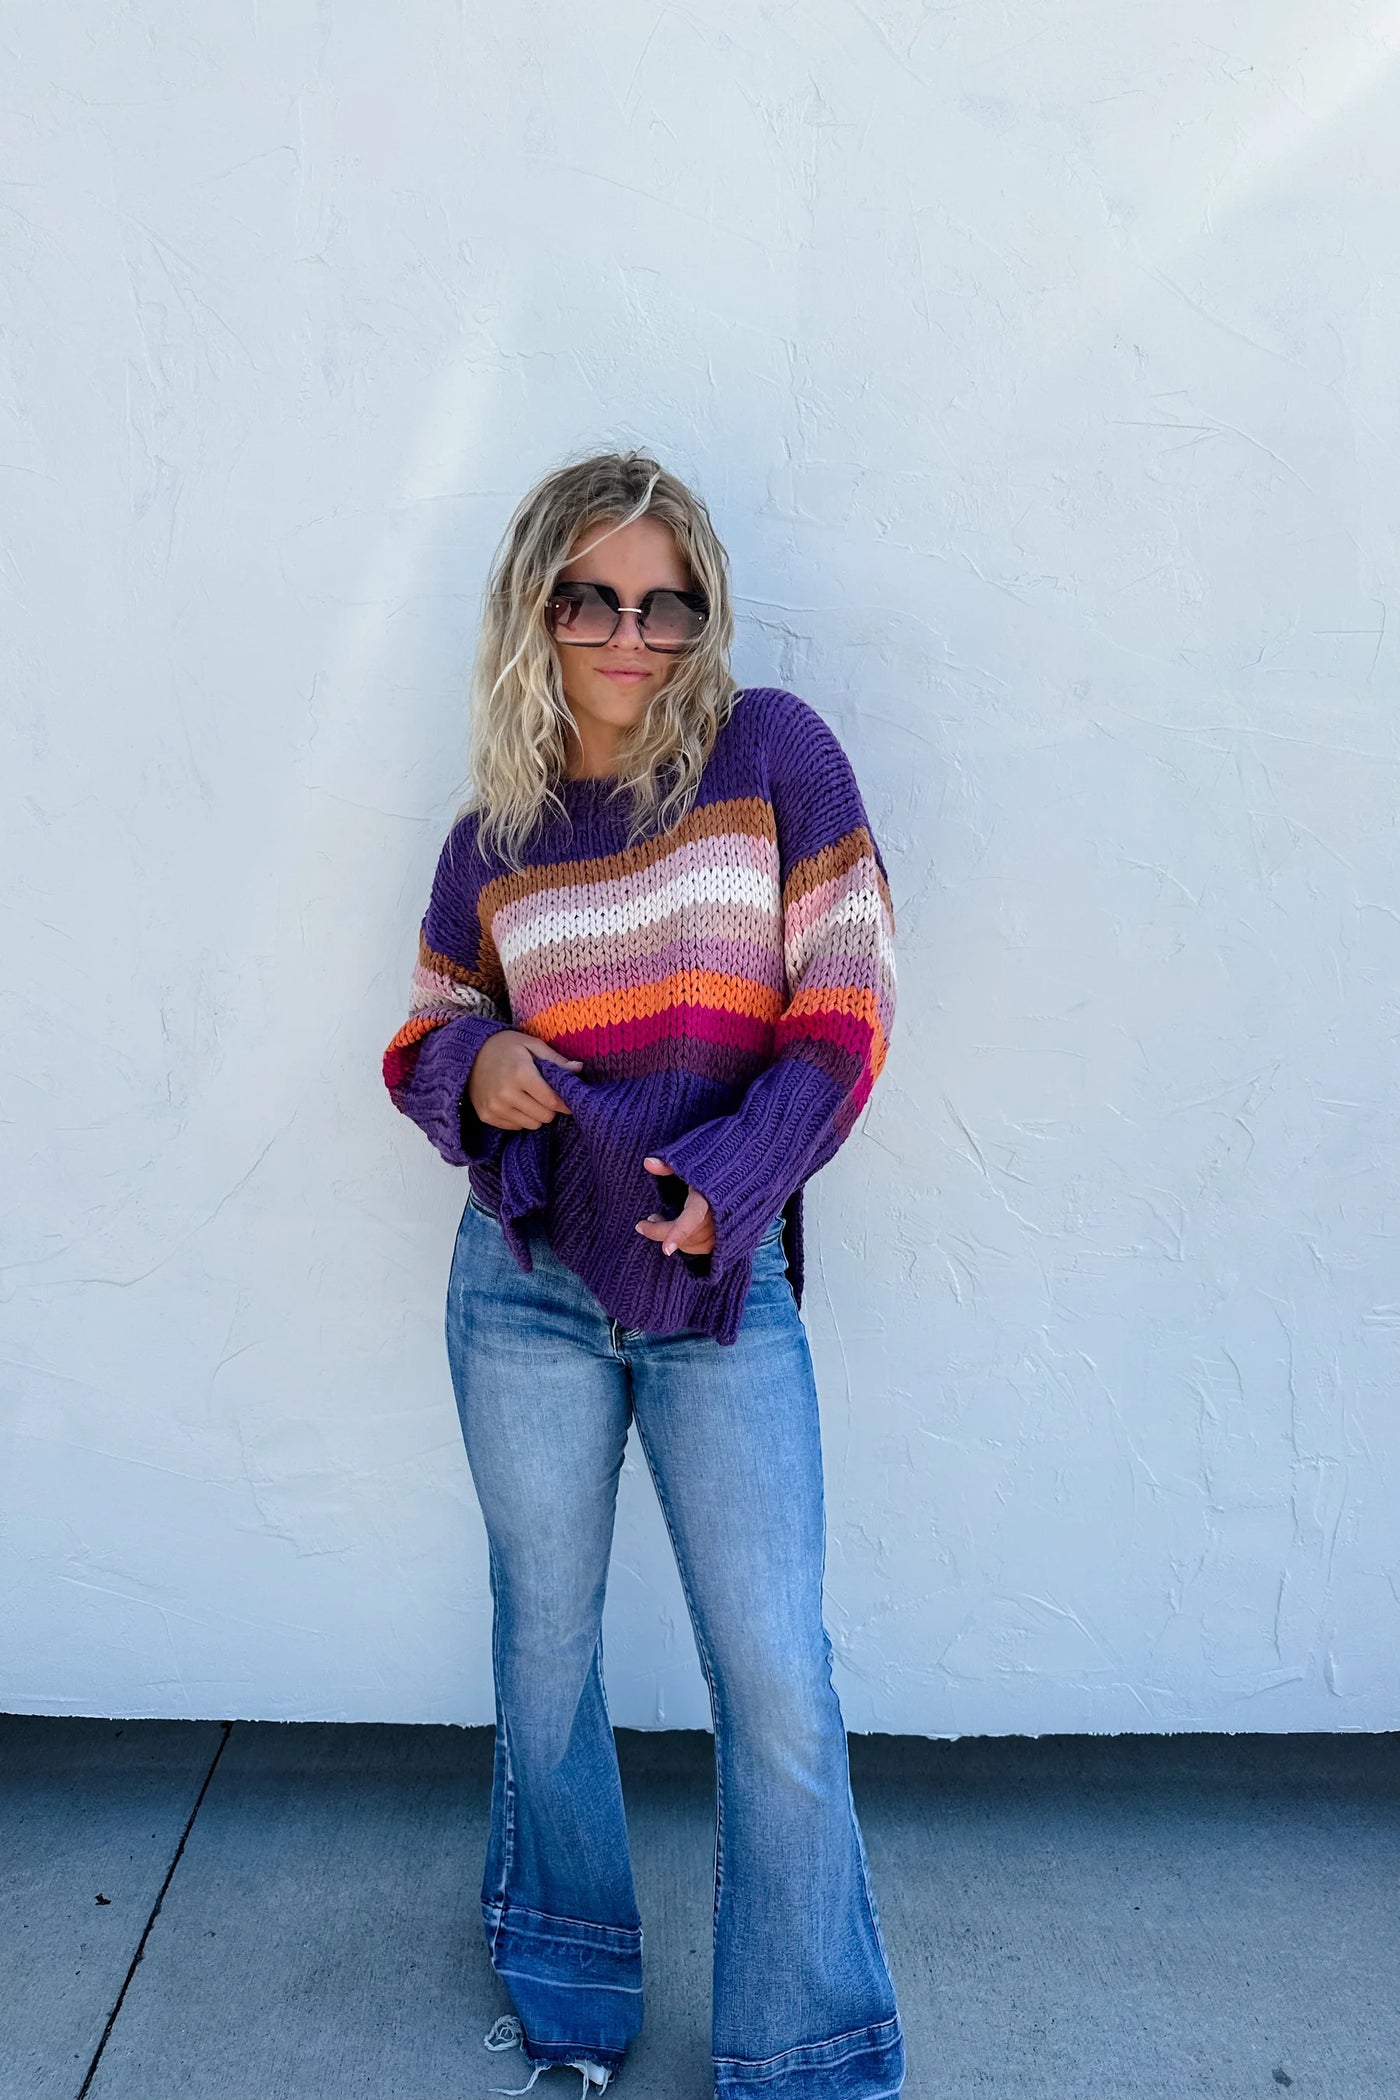 Handmade Chunky Knit Sweater by Blakeley